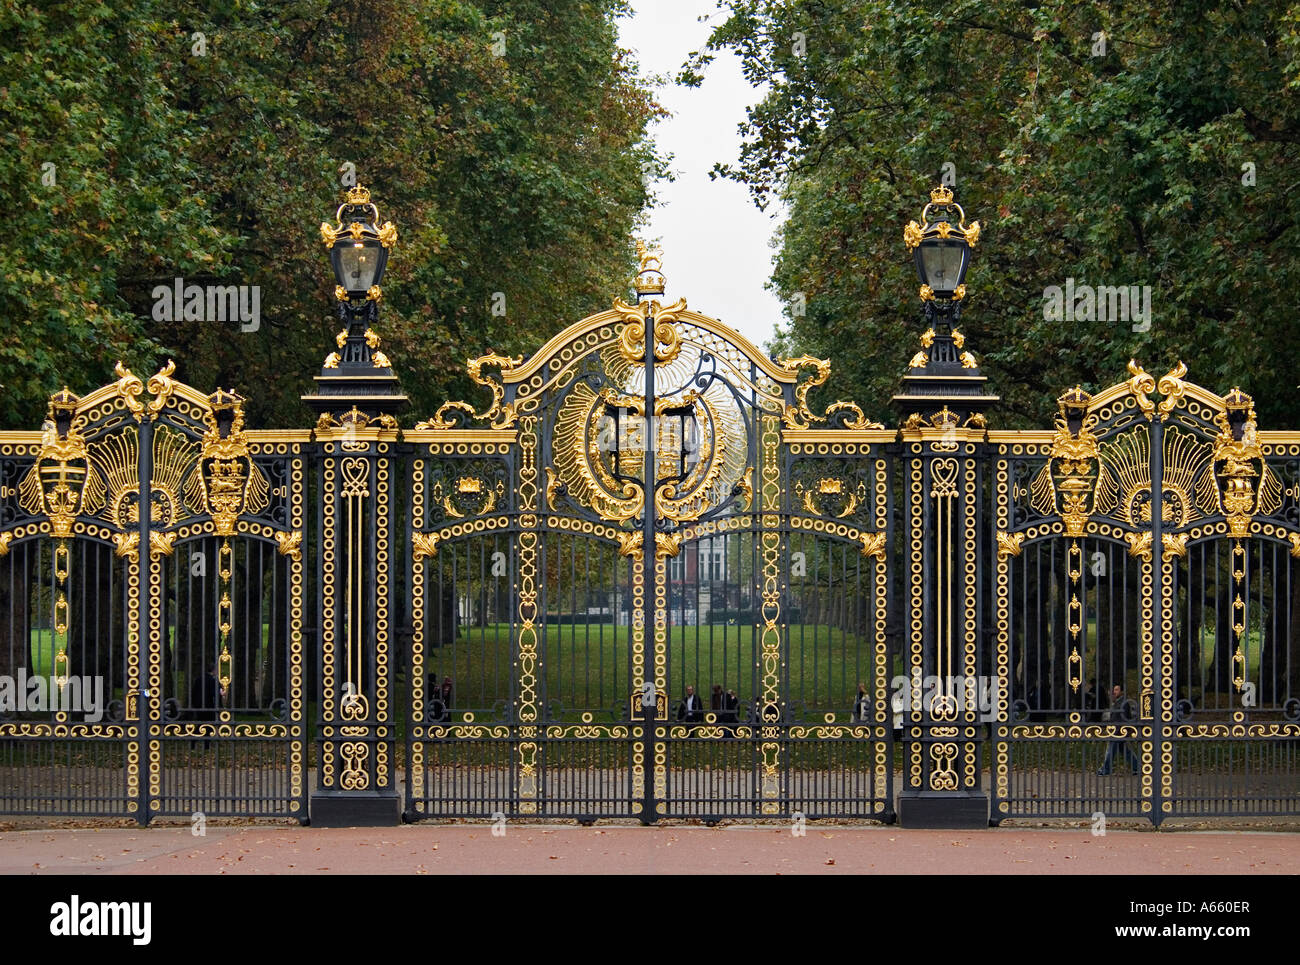 Canada Gate with the Green Park Beyond near Buckingham Palace London England Stock Photo